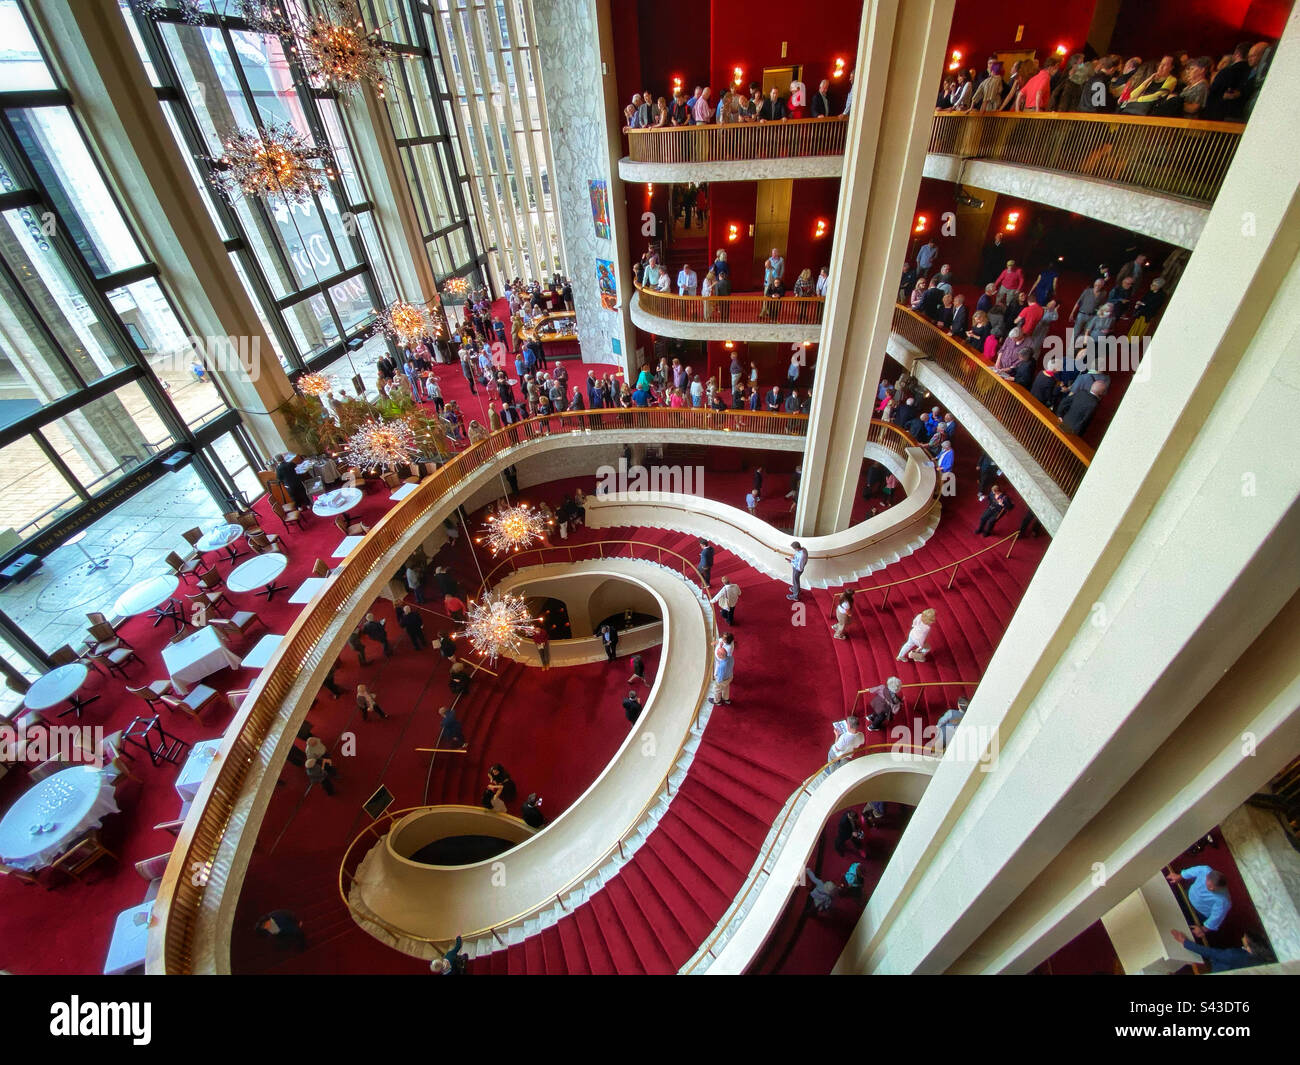 The central staircase at the Metropolitan Opera in New York City Stock Photo